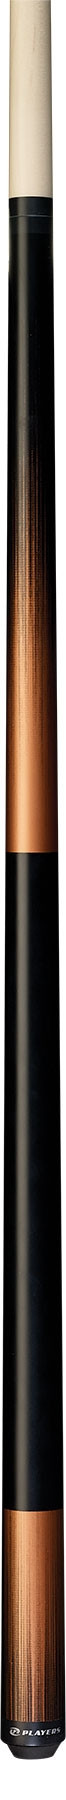 Players C-704 Copper Pool Cue